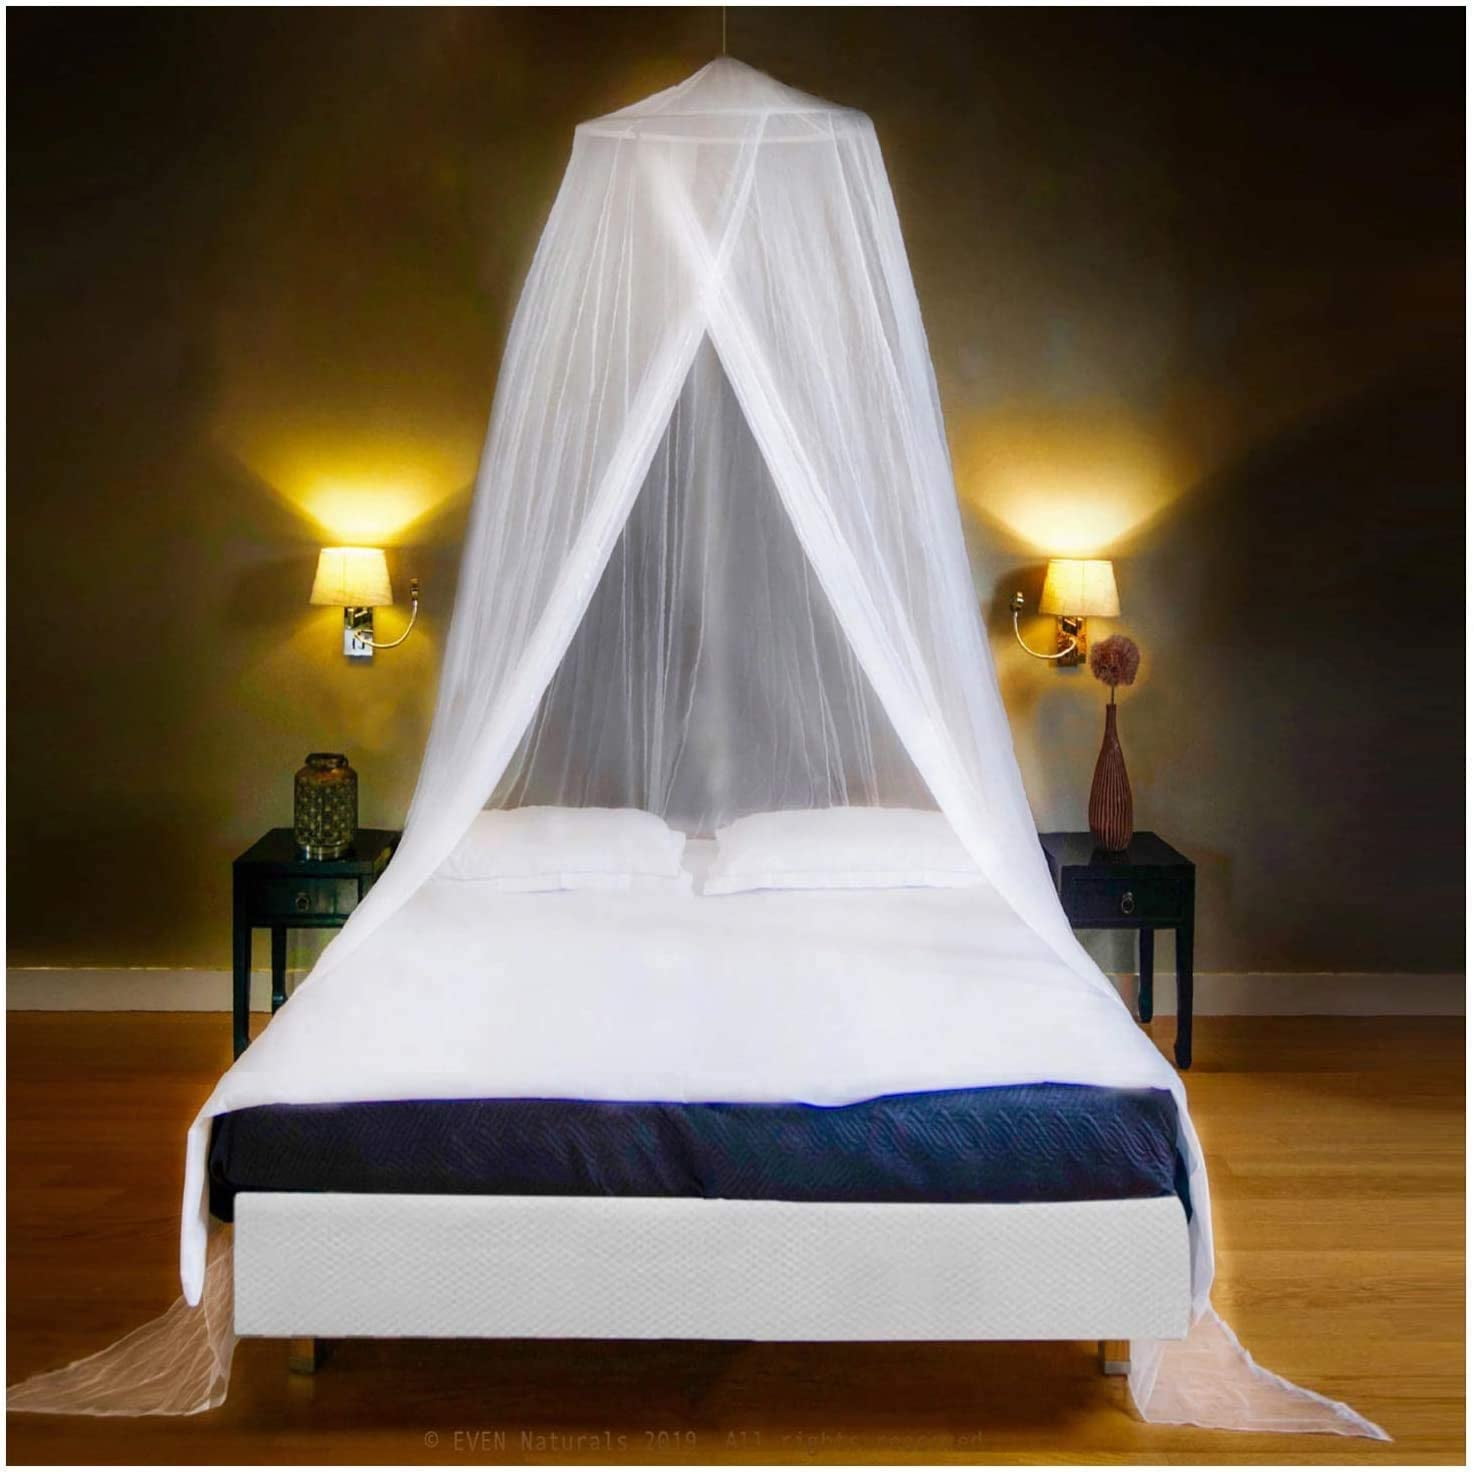 Fits Up To a Queen Sized Bed or Hammock! Mosquito Net 